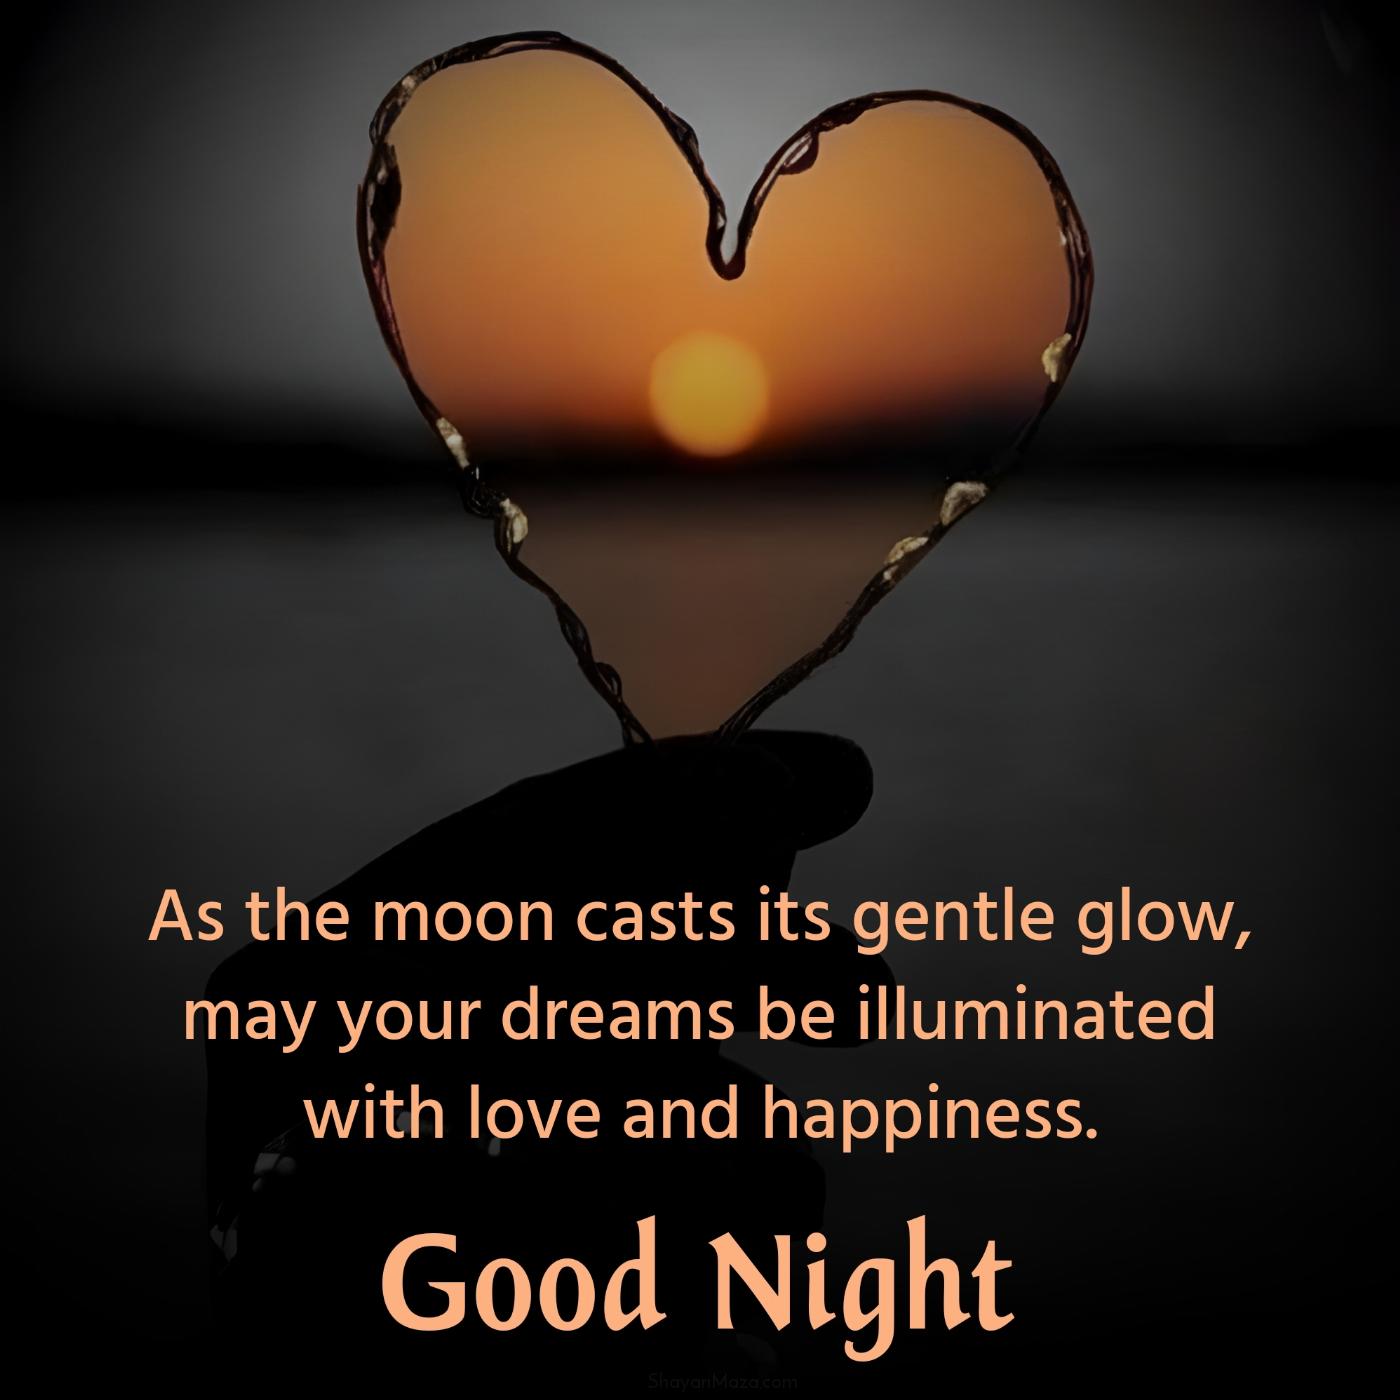 As the moon casts its gentle glow may your dreams be illuminated